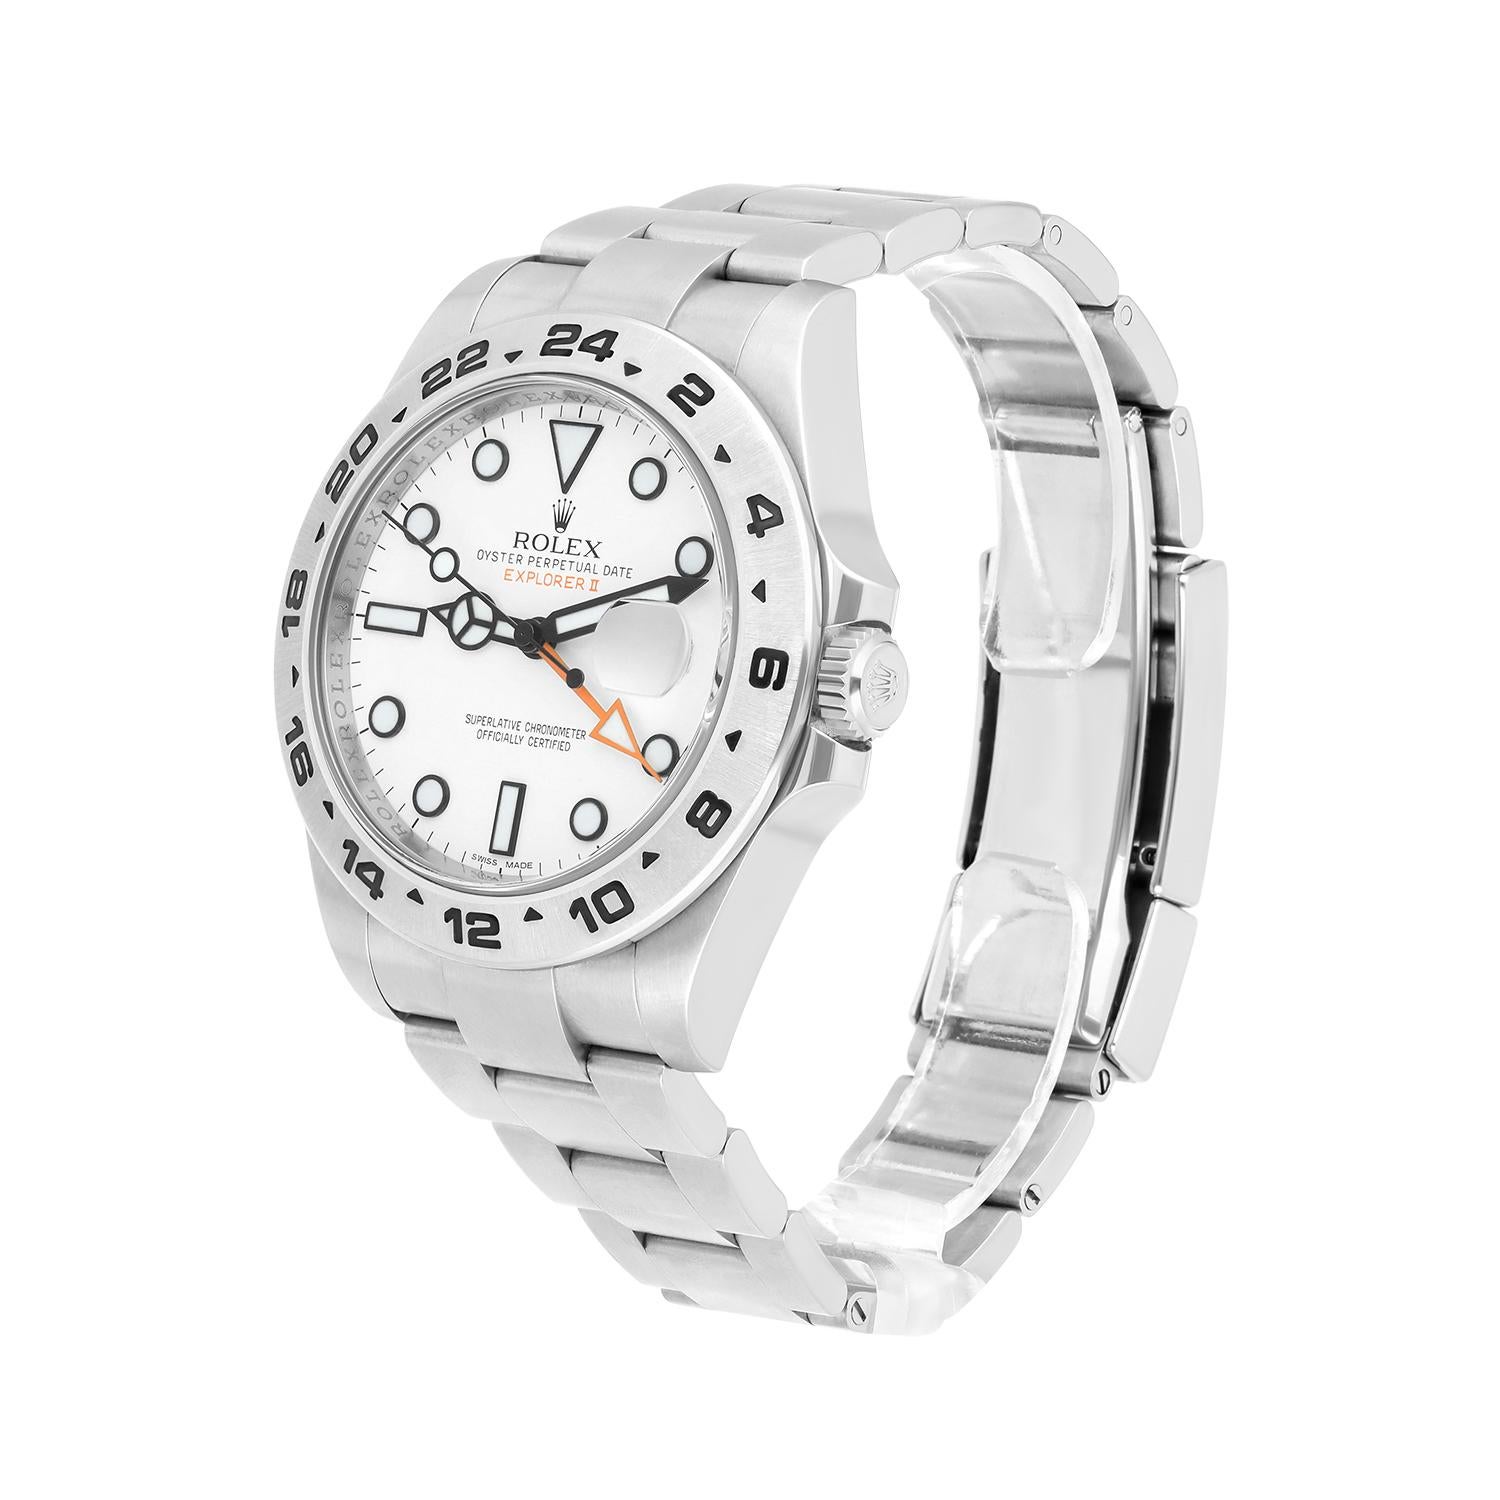 Men's Rolex Explorer II 216570 White Dial Stainless Steel Mens Watch For Sale